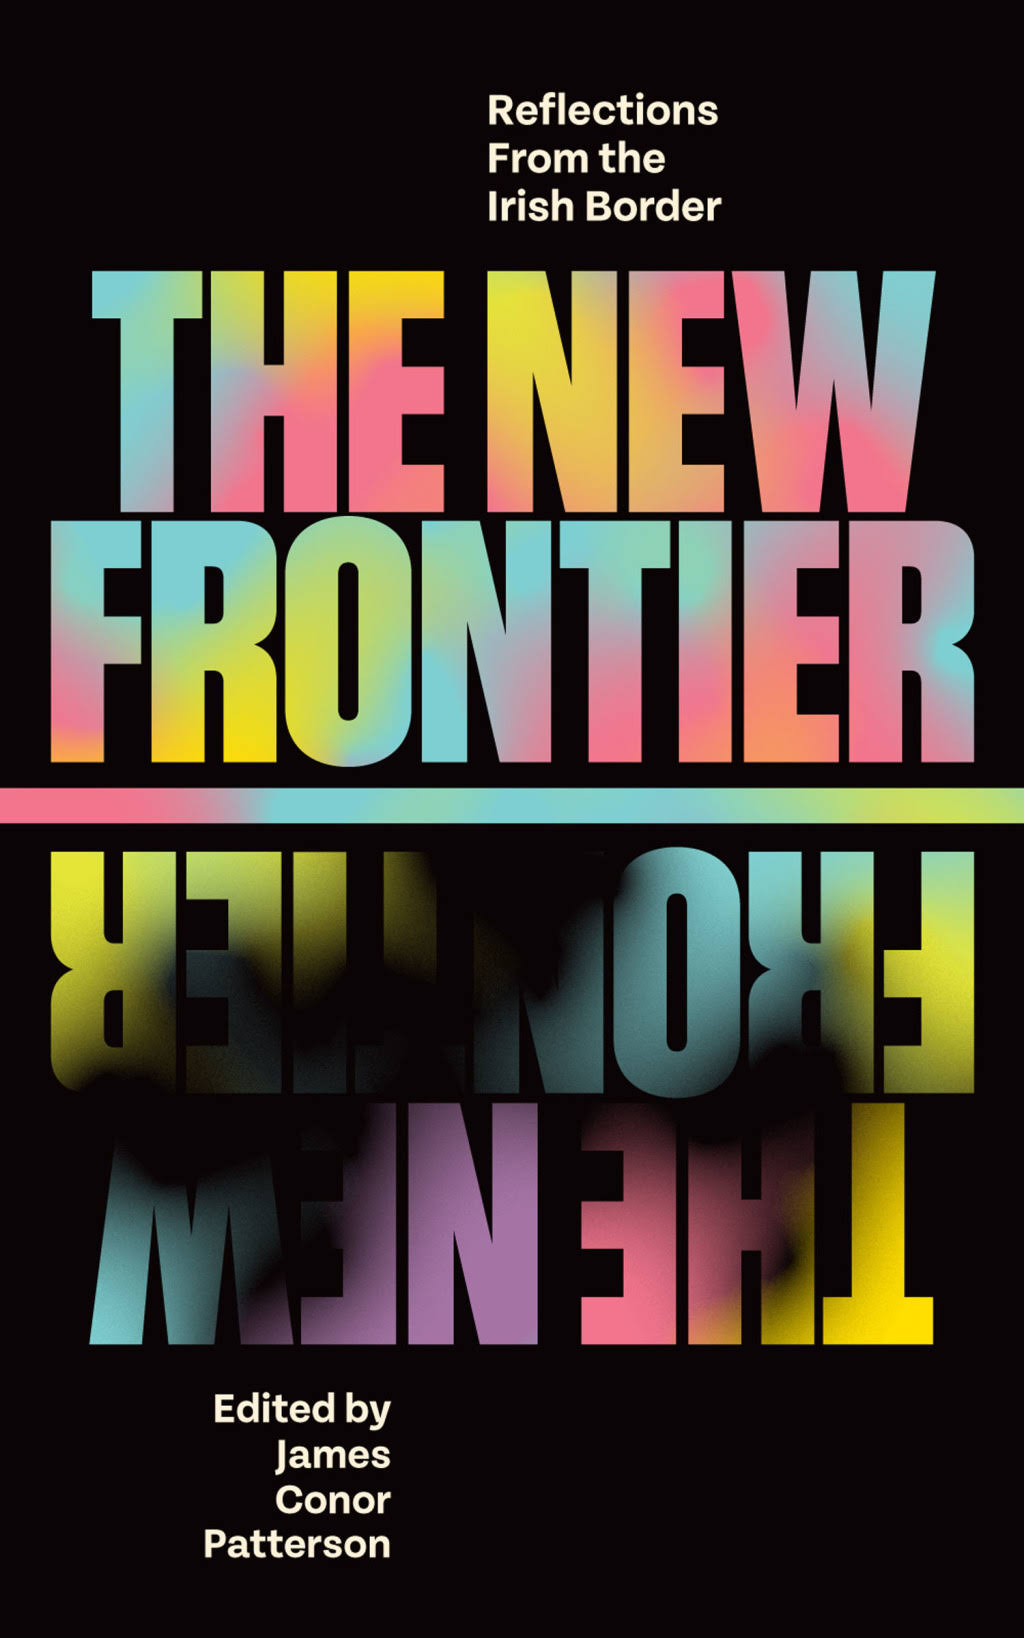 The New Frontier by James Conor Patterson